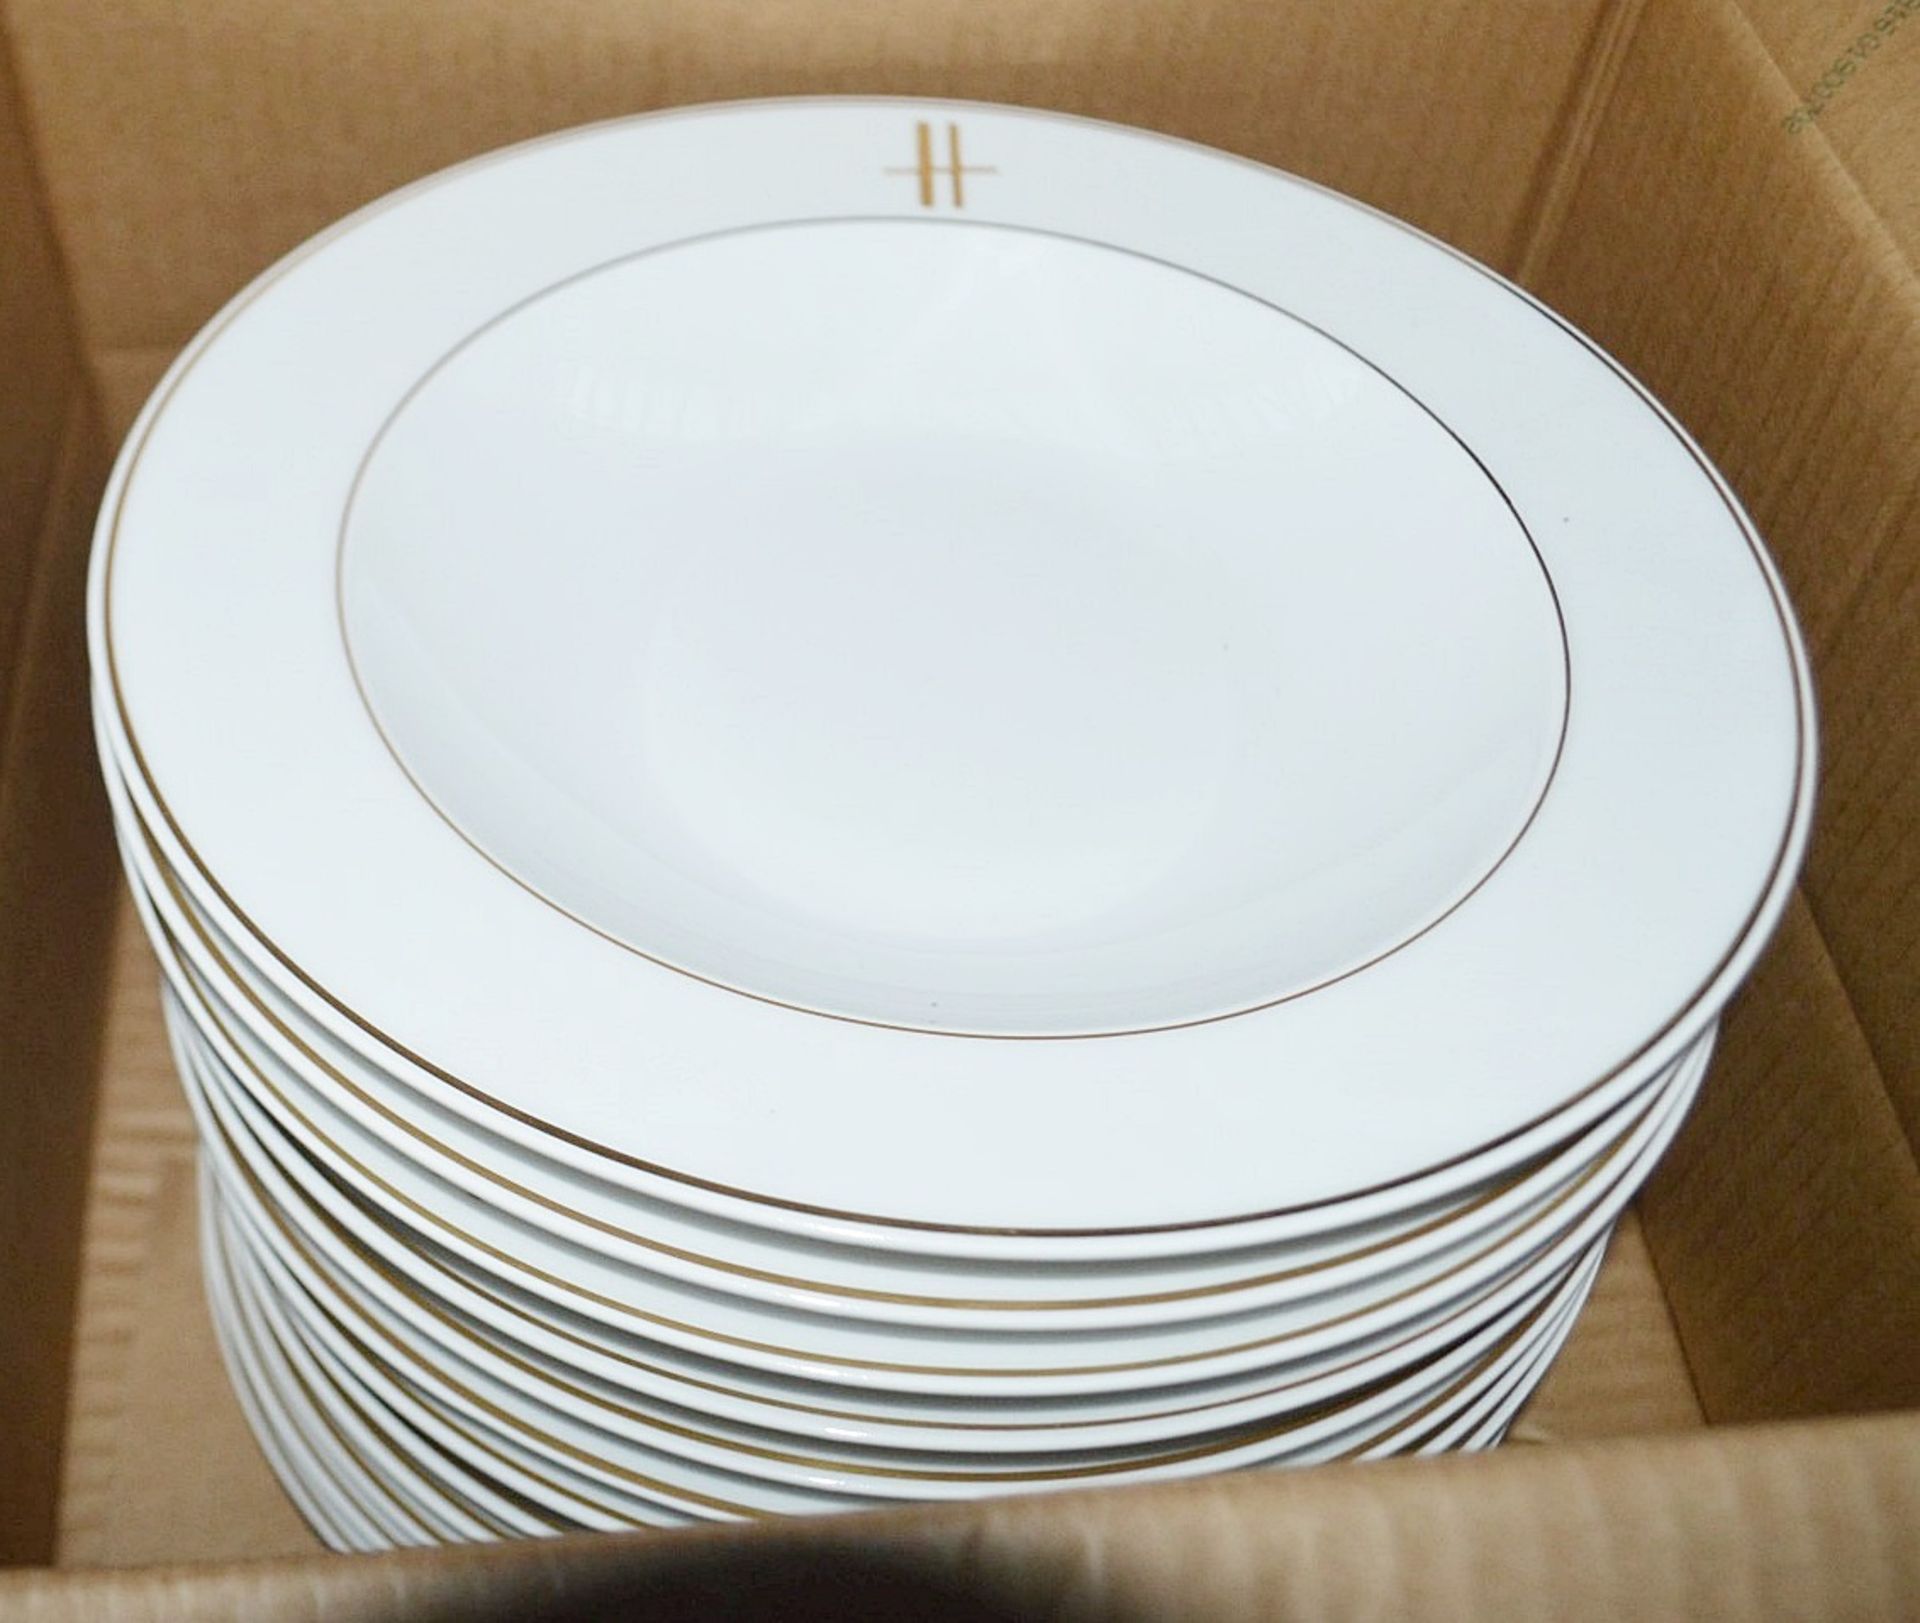 20 x PILLIVUYT Porcelain Pasta / Soup Plates In White Featuring 'Famous Branding' In Gold - - Image 4 of 6